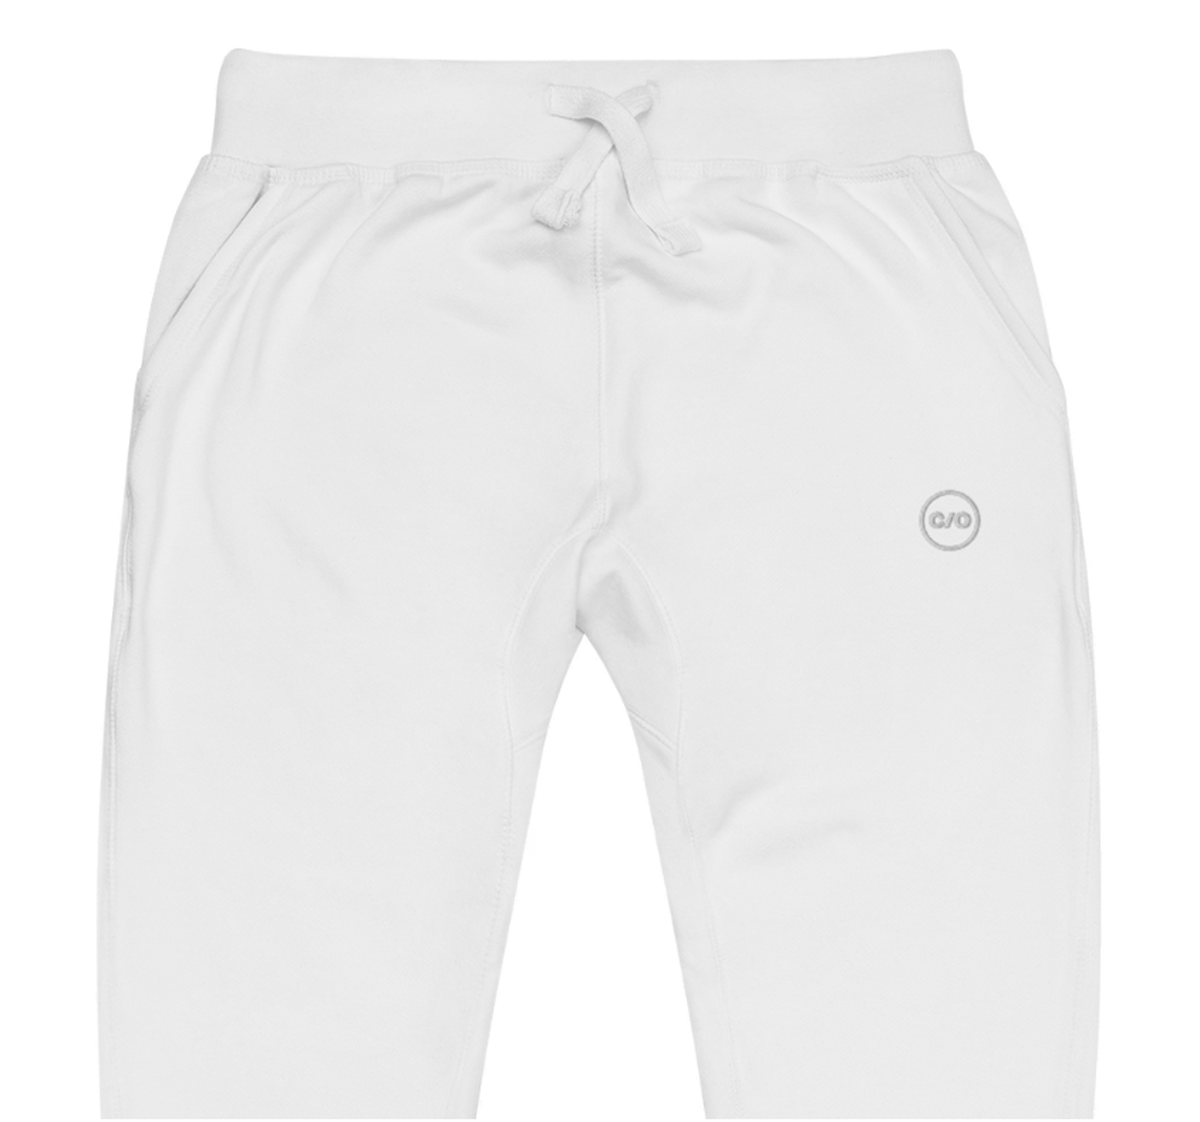 Neue Supply Co. Women's Performance Jogger in White